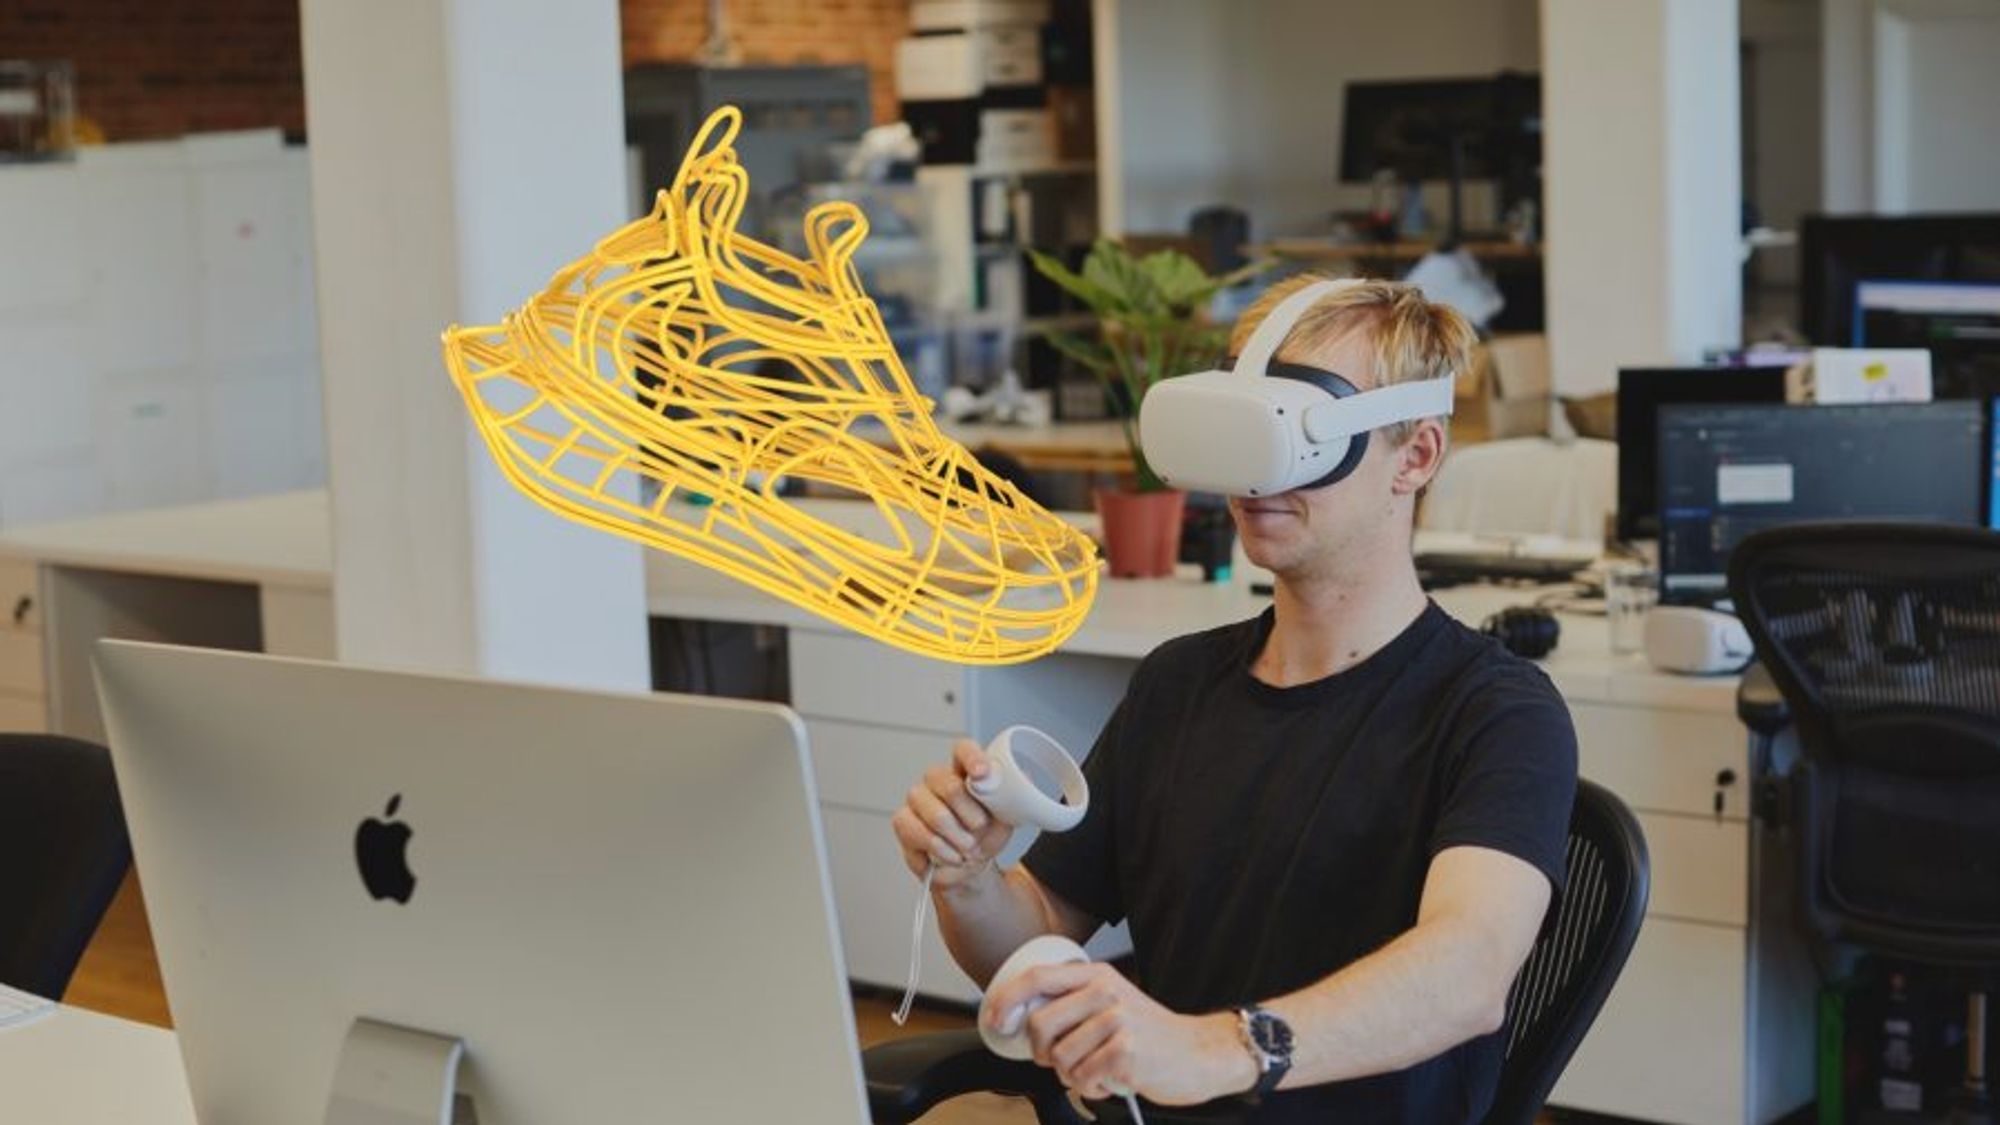 Gravity Sketch raises £25m to bring designs alive in virtual reality